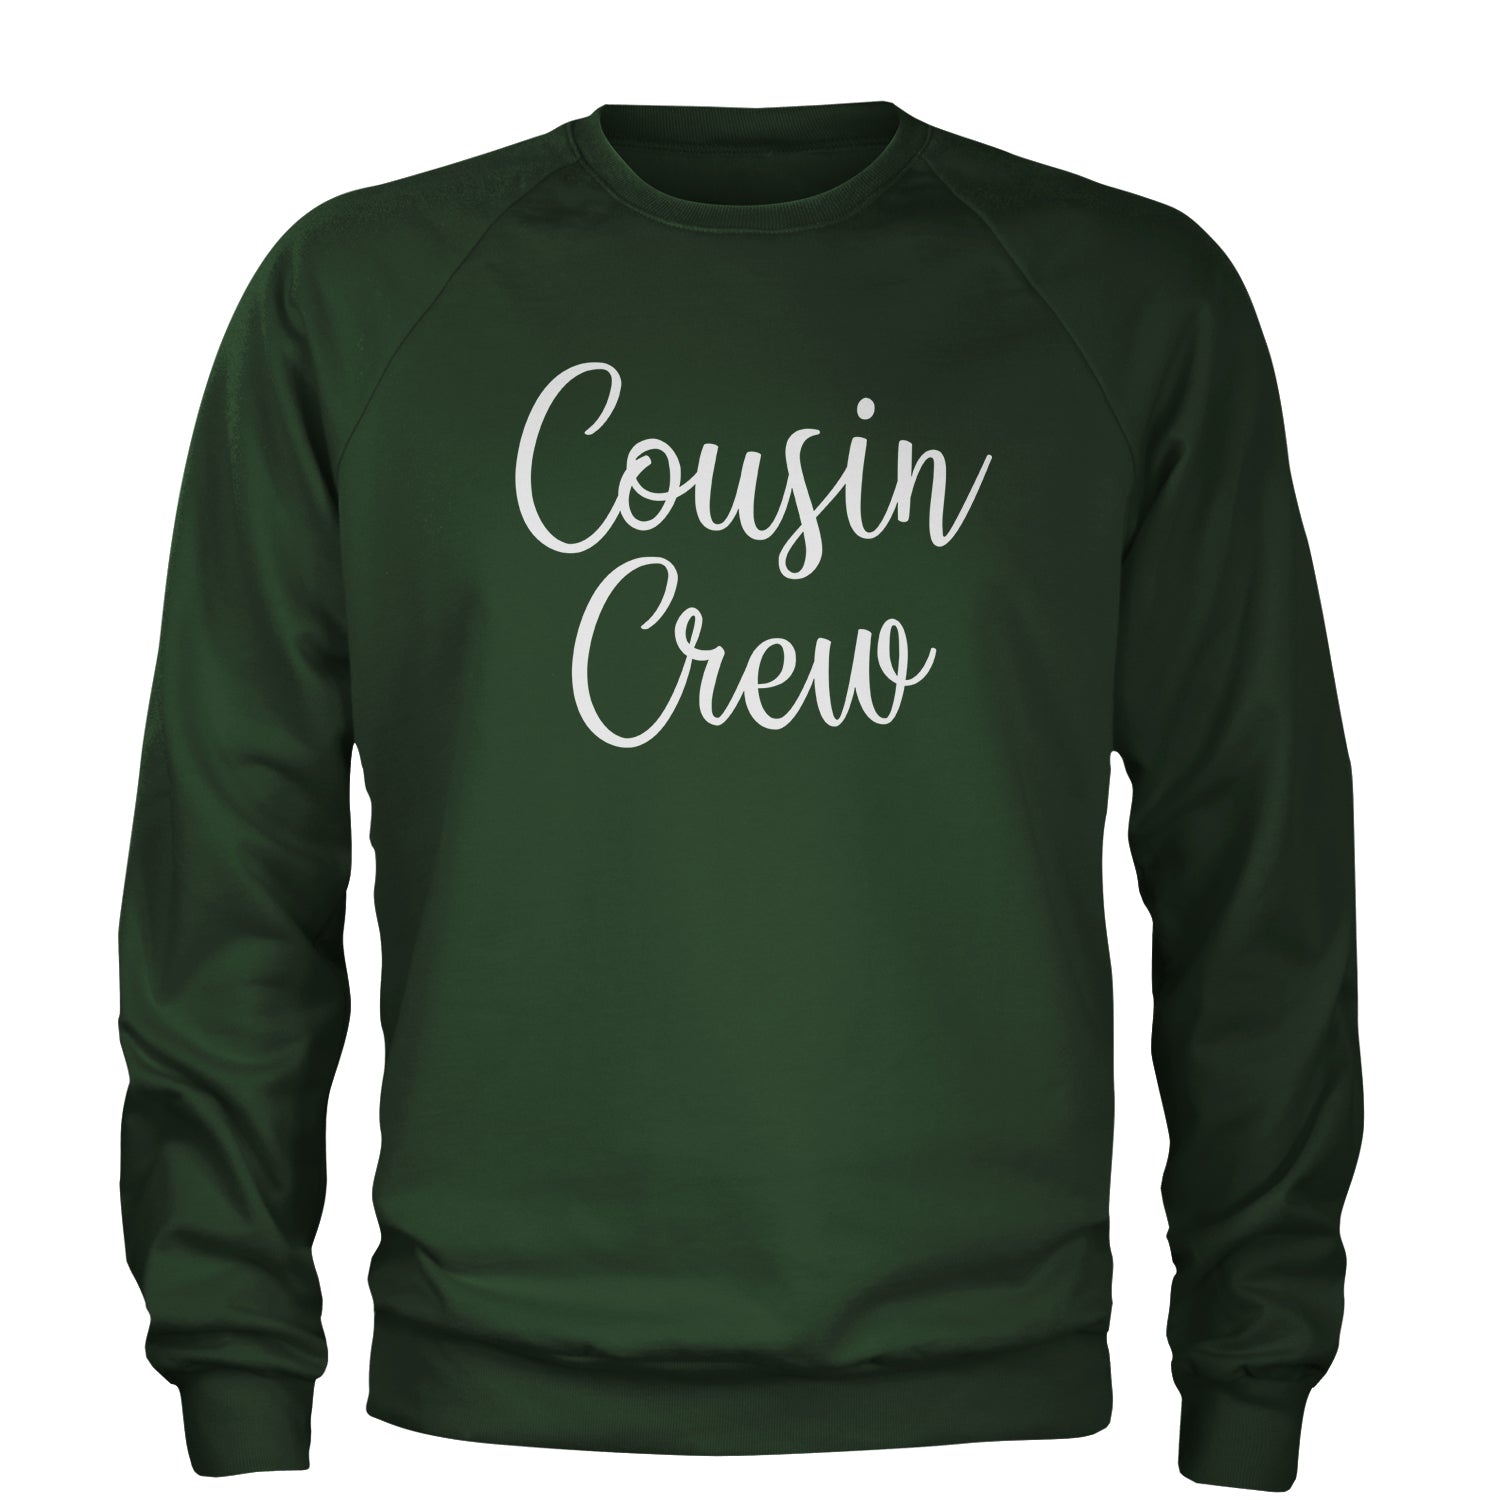 Cousin Crew Fun Family Outfit Adult Crewneck Sweatshirt barbecue, bbq, cook, family, out, reunion by Expression Tees